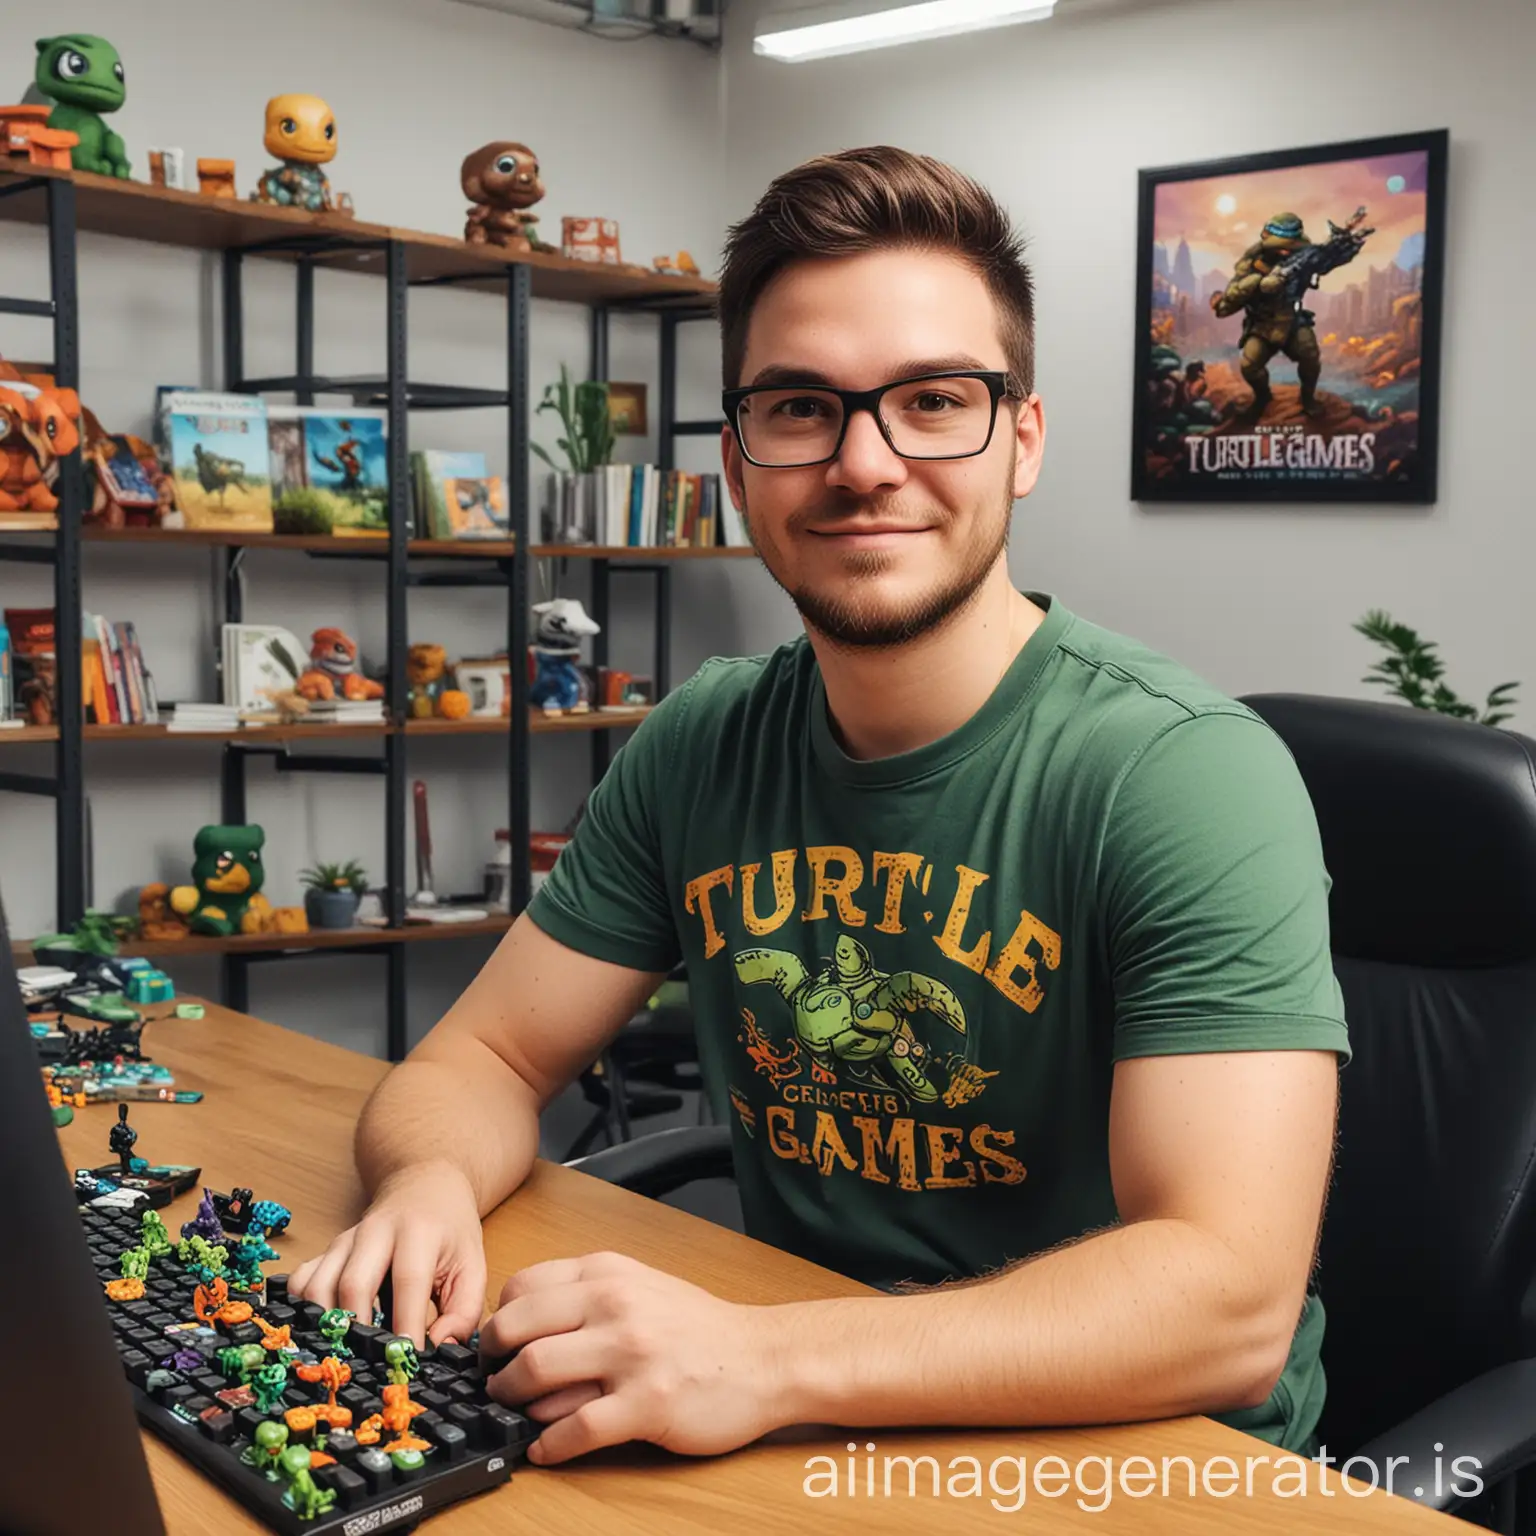 Creative-Game-Designer-in-Colorful-Turtle-Games-Office